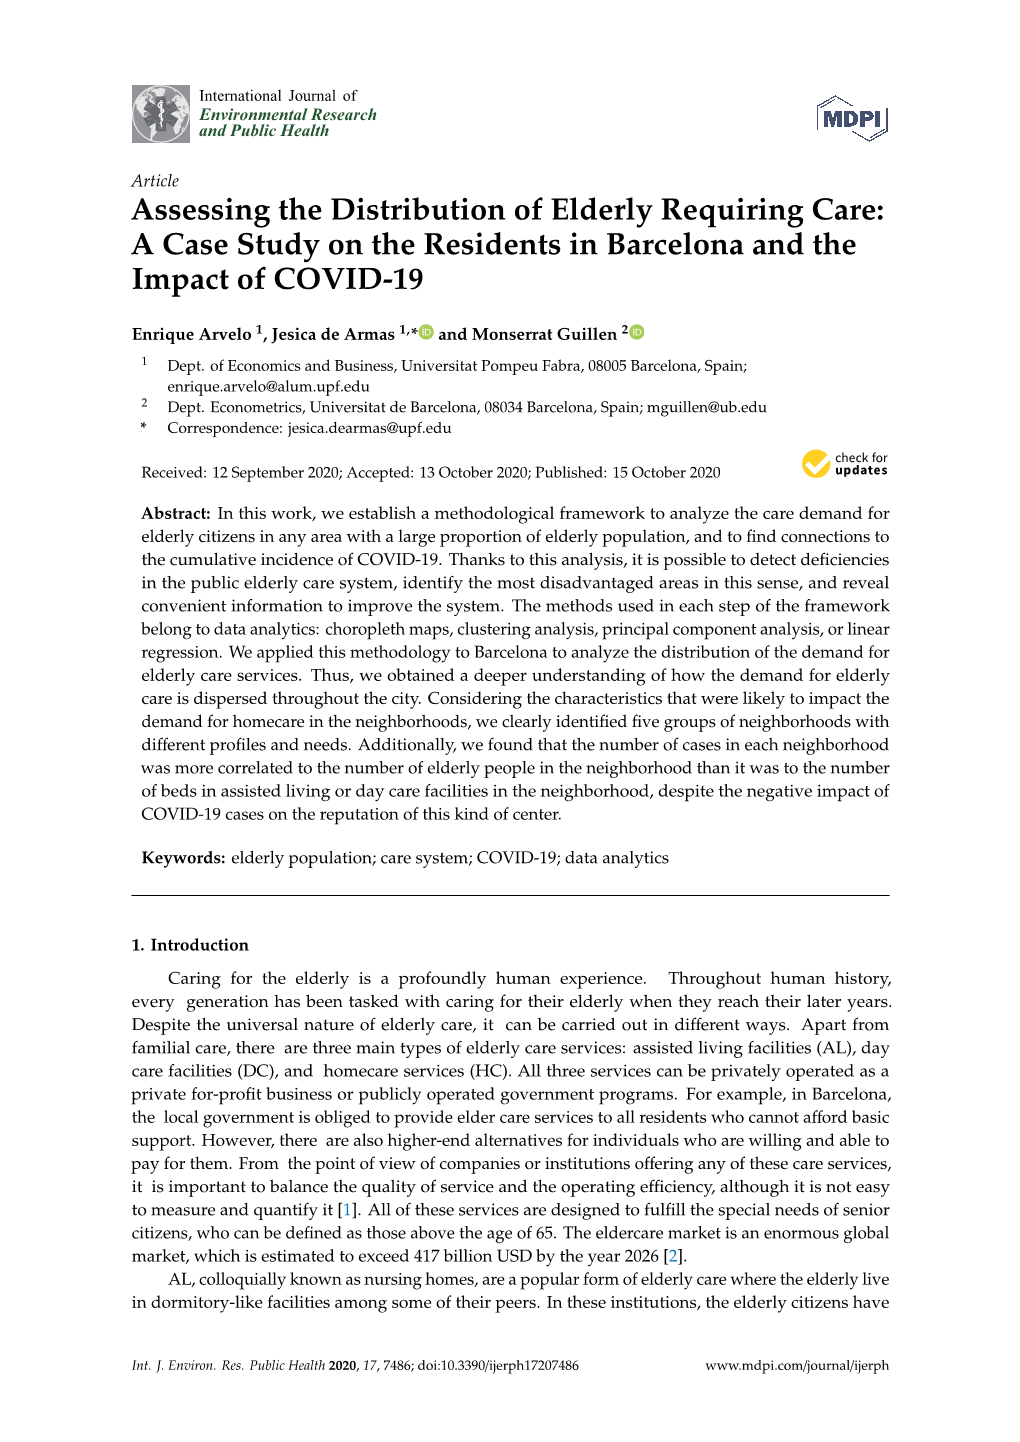 Assessing the Distribution of Elderly Requiring Care: a Case Study on the Residents in Barcelona and the Impact of COVID-19